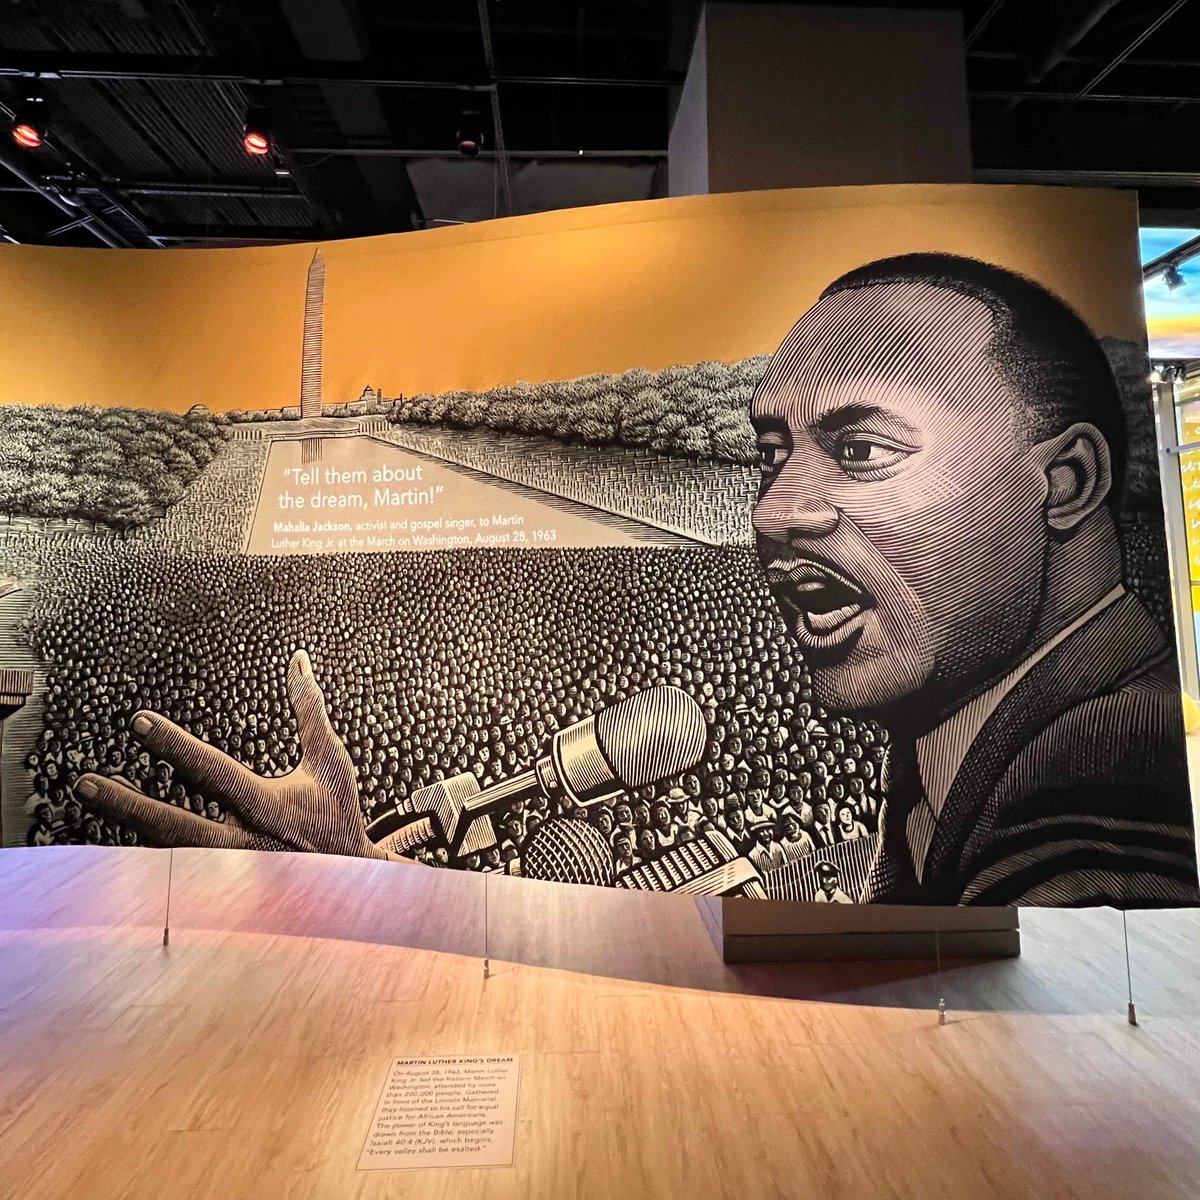 Martin Luther King Jr., civil rights leader, Nobel Prize winner, and Baptist minister, was born #OnThisDay in 1929. Just over a mile away from the museum, the #MLK memorial in DC displays some of his prolific quotes, including many inspired by the Bible. #BibleImpact